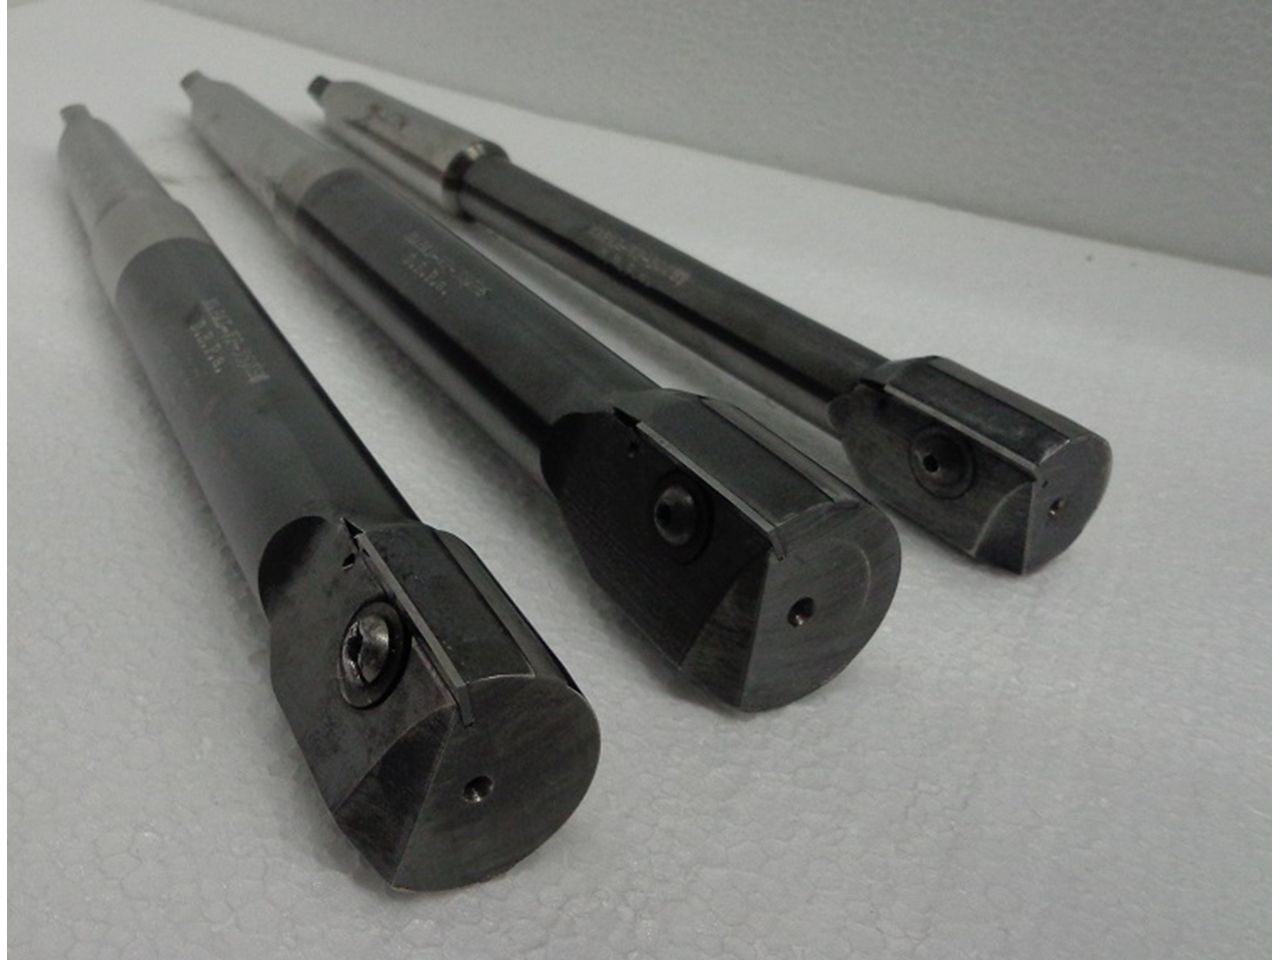 Spares & Accessories/SET OF 3 ABRASIVE FILES MAPAL TYPE WP